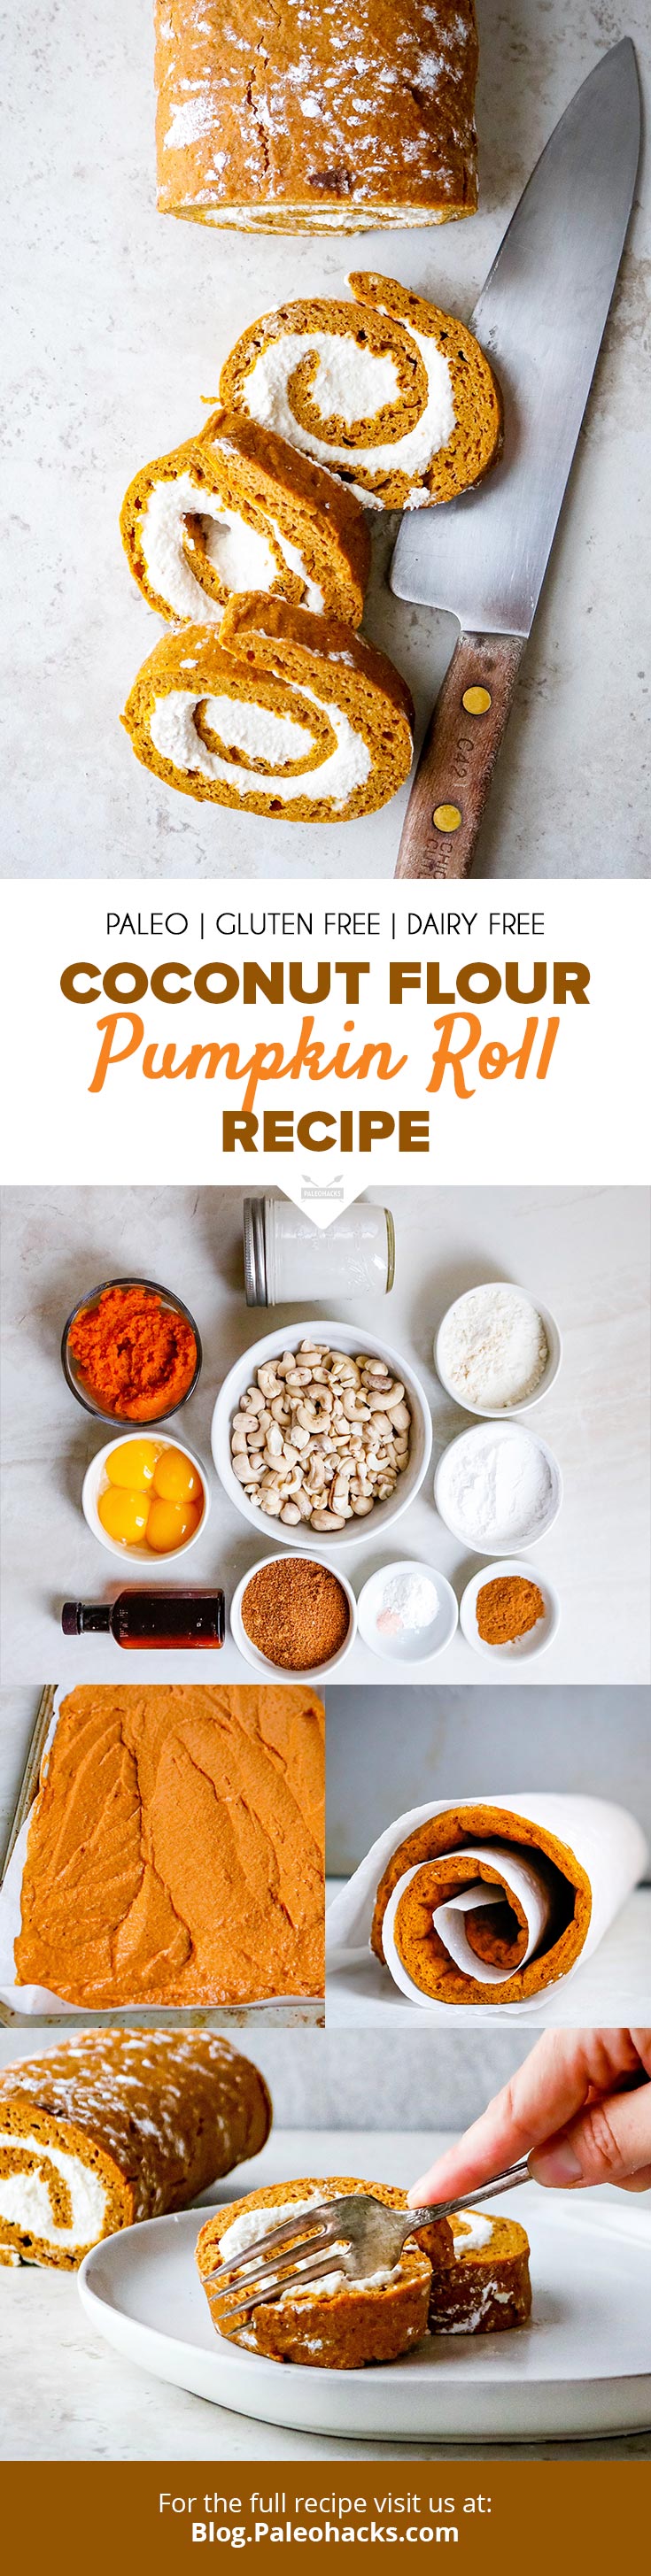 Satisfy a pumpkin spice craving with this decadent cake roll made with gluten-free flour and dairy-free filling. The dreamy coconut cream filling is to die for!